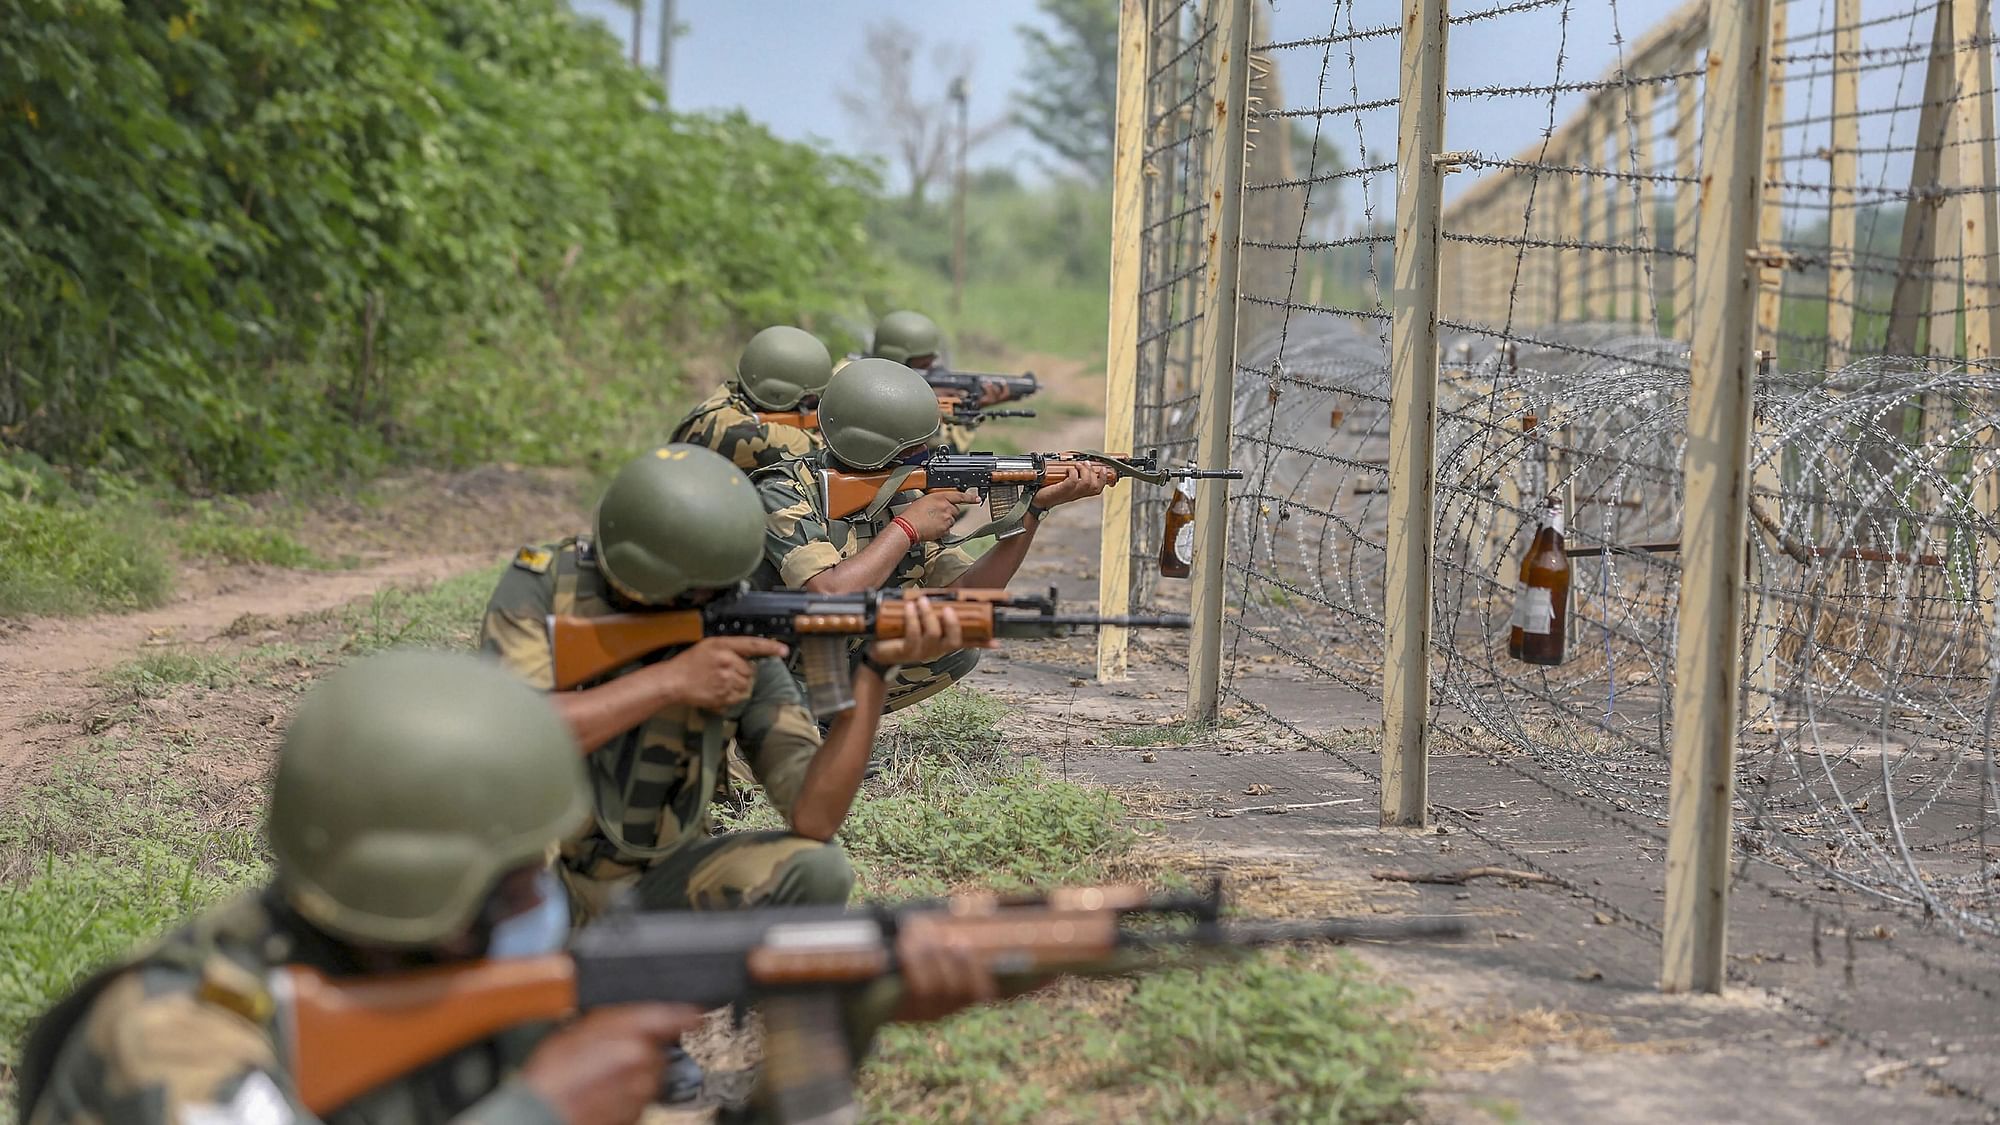 <div class="paragraphs"><p>The incident occurred at the Kakmarichar BSF camp - situated along the India-Bangladesh border. Image used for representative purposes.&nbsp;</p></div>